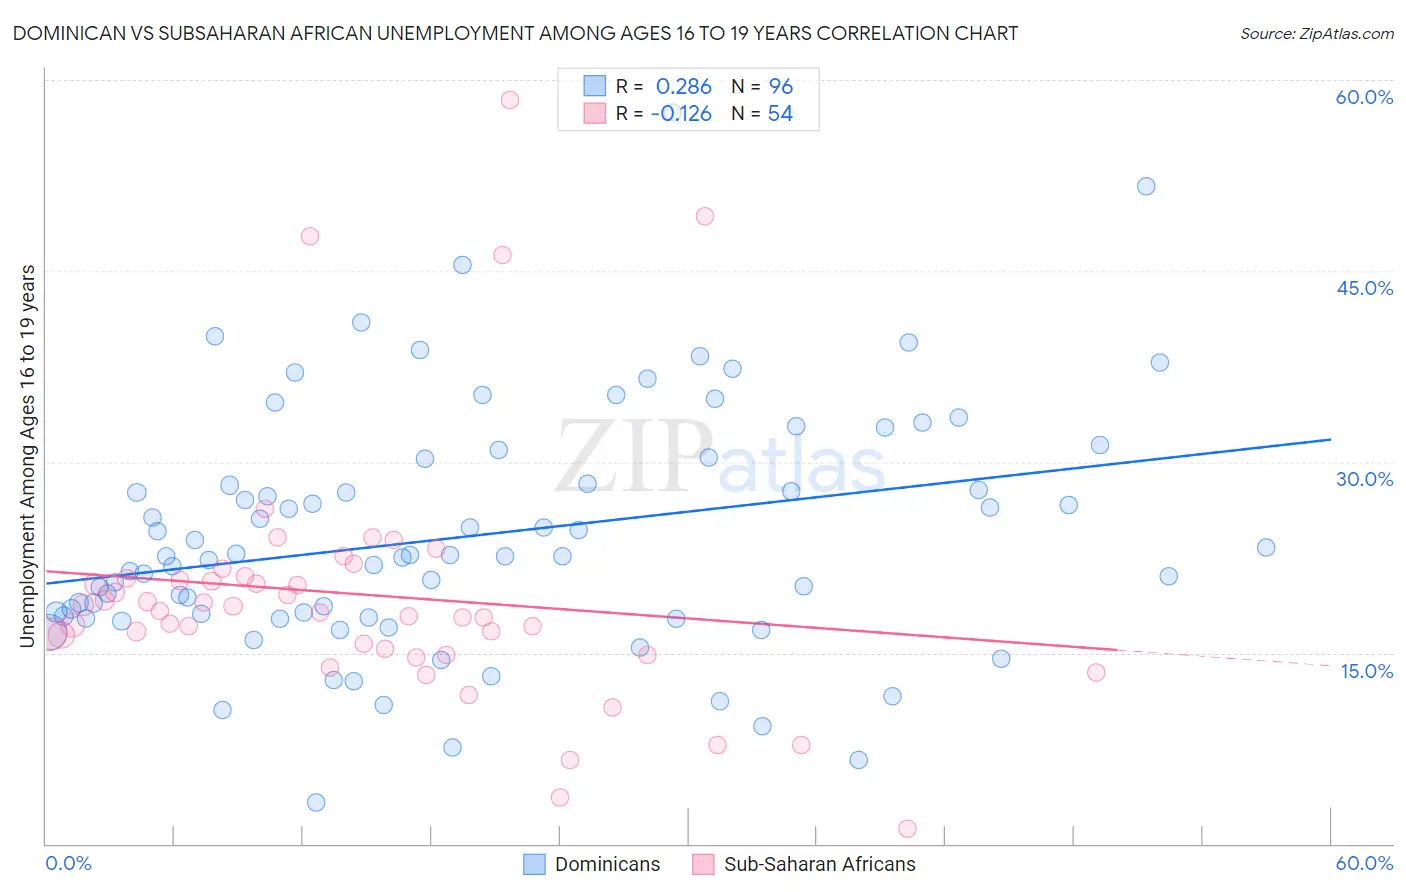 Dominican vs Subsaharan African Unemployment Among Ages 16 to 19 years